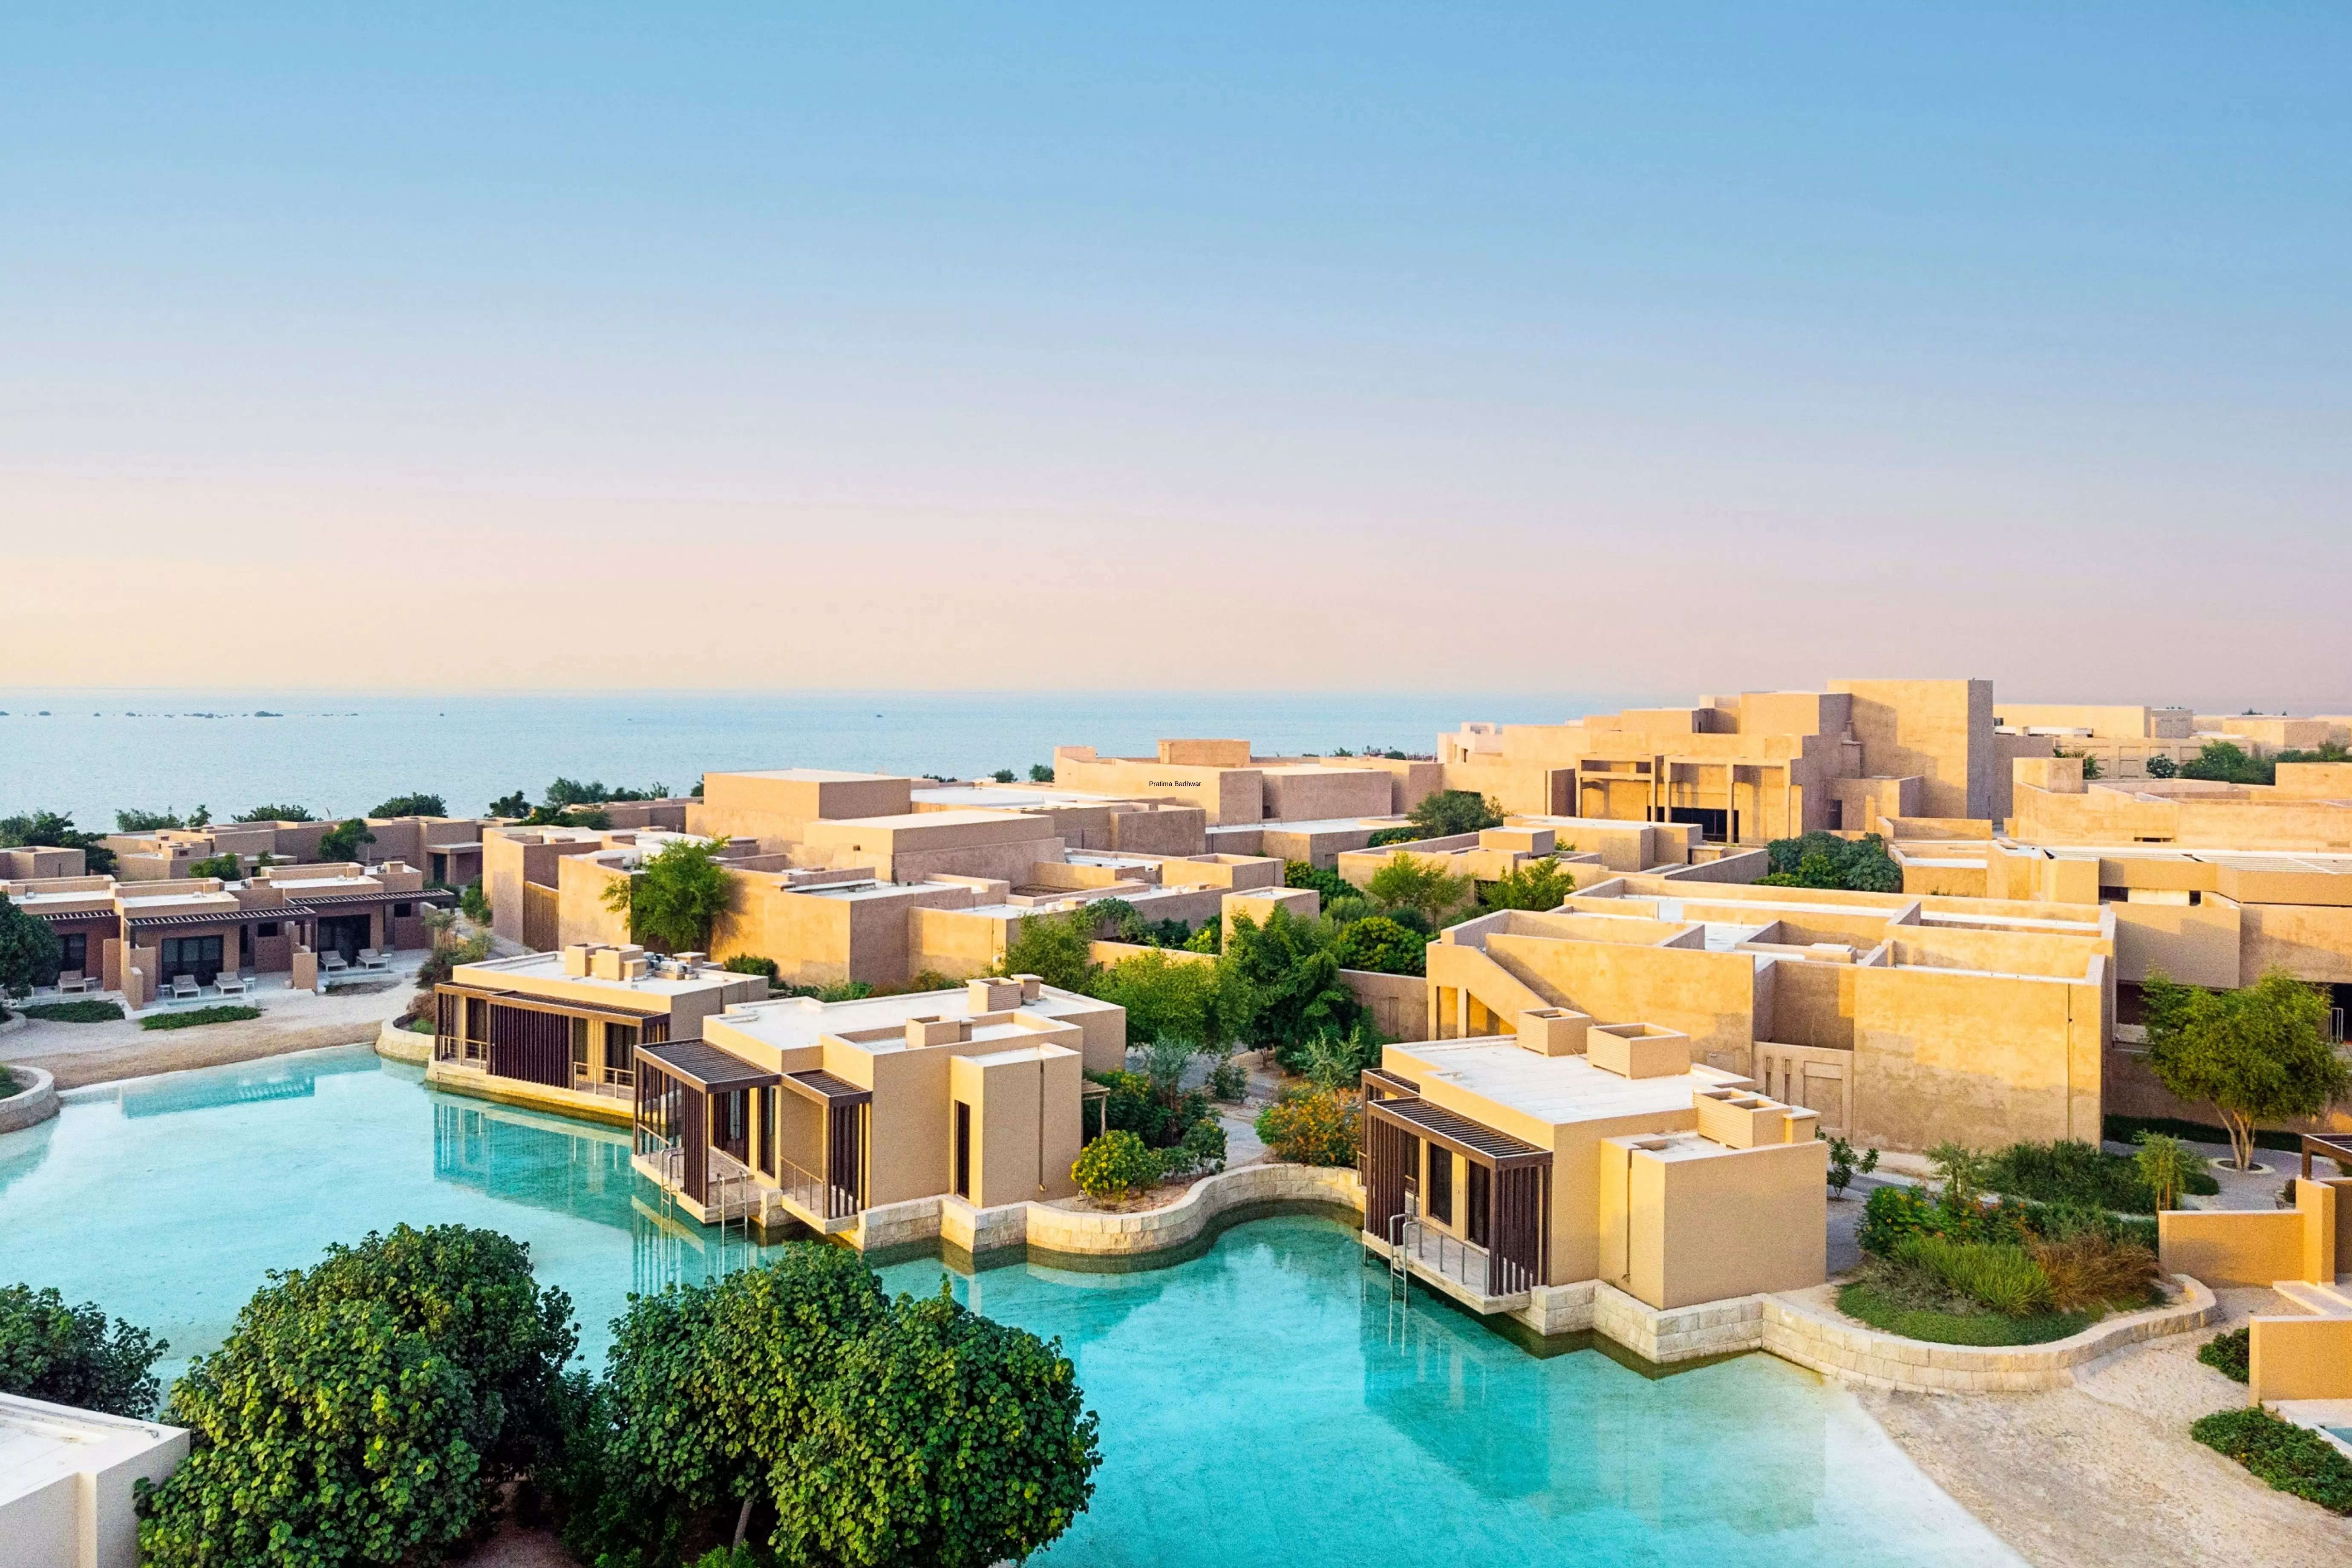 Chiva-Som is all set to open Zulal Wellness Resort Qatar by month-end